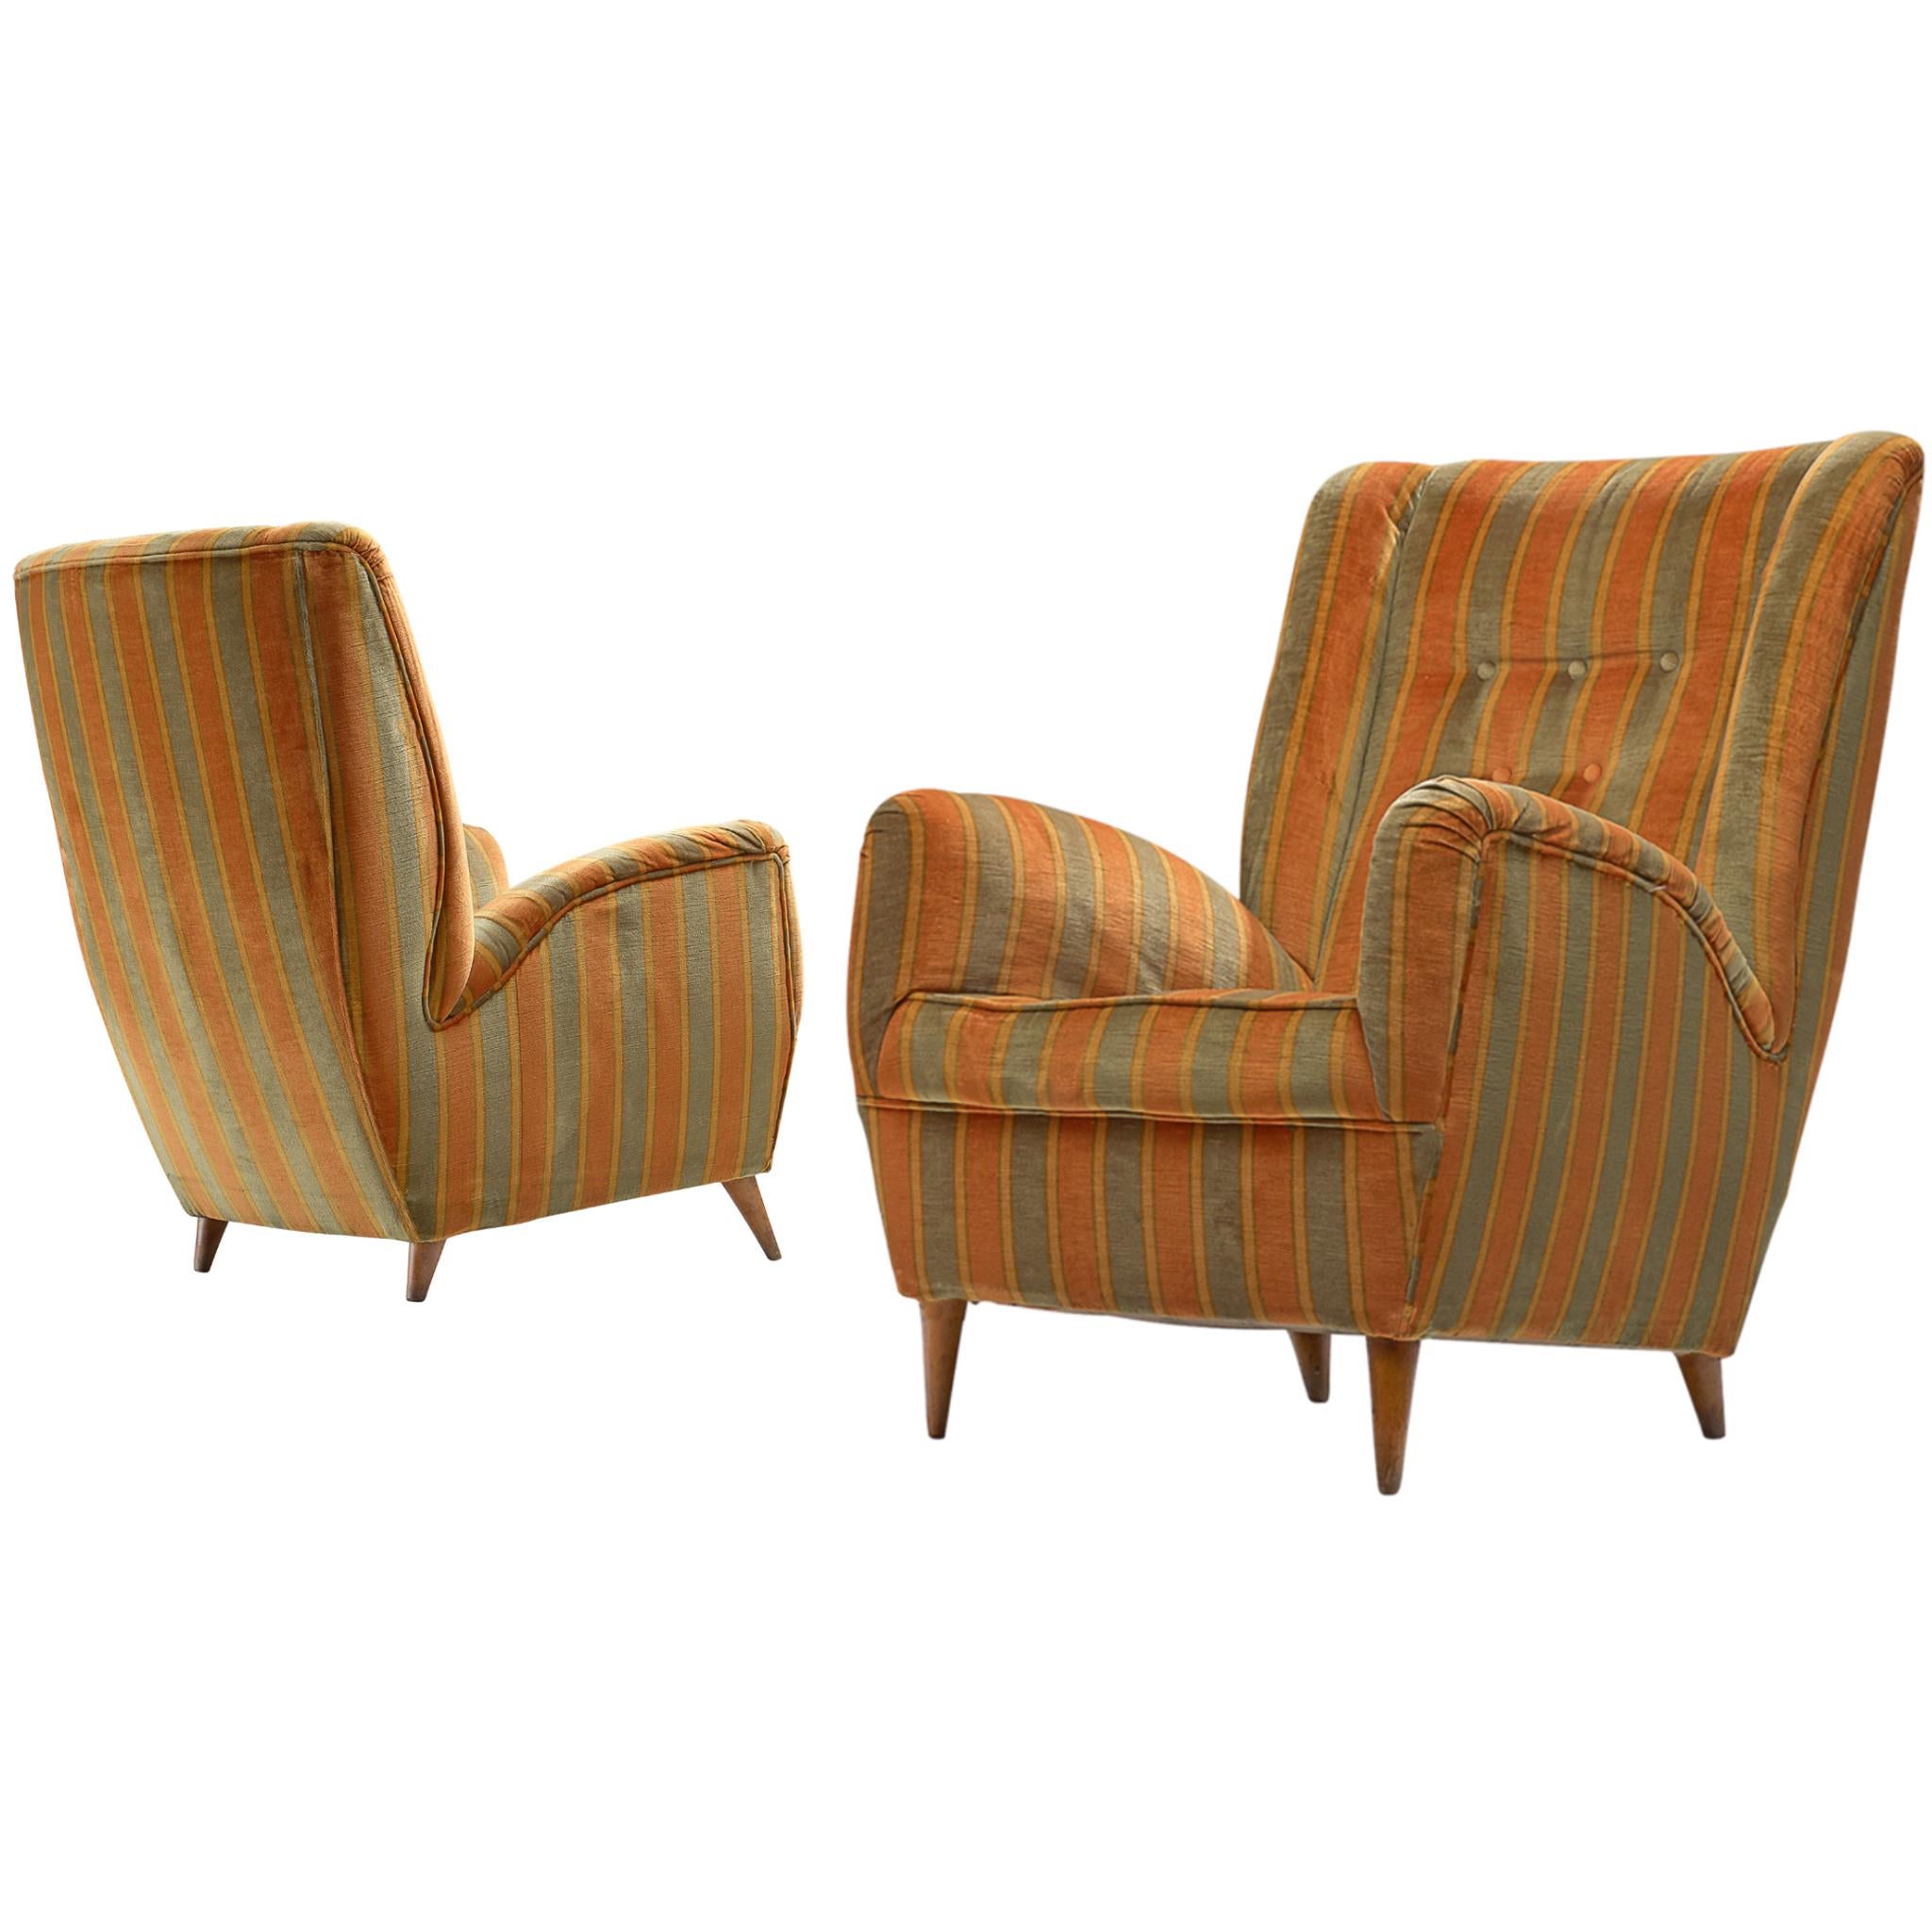 Italian Pair of High Back Chairs in Green and Orange Striped Upholstery